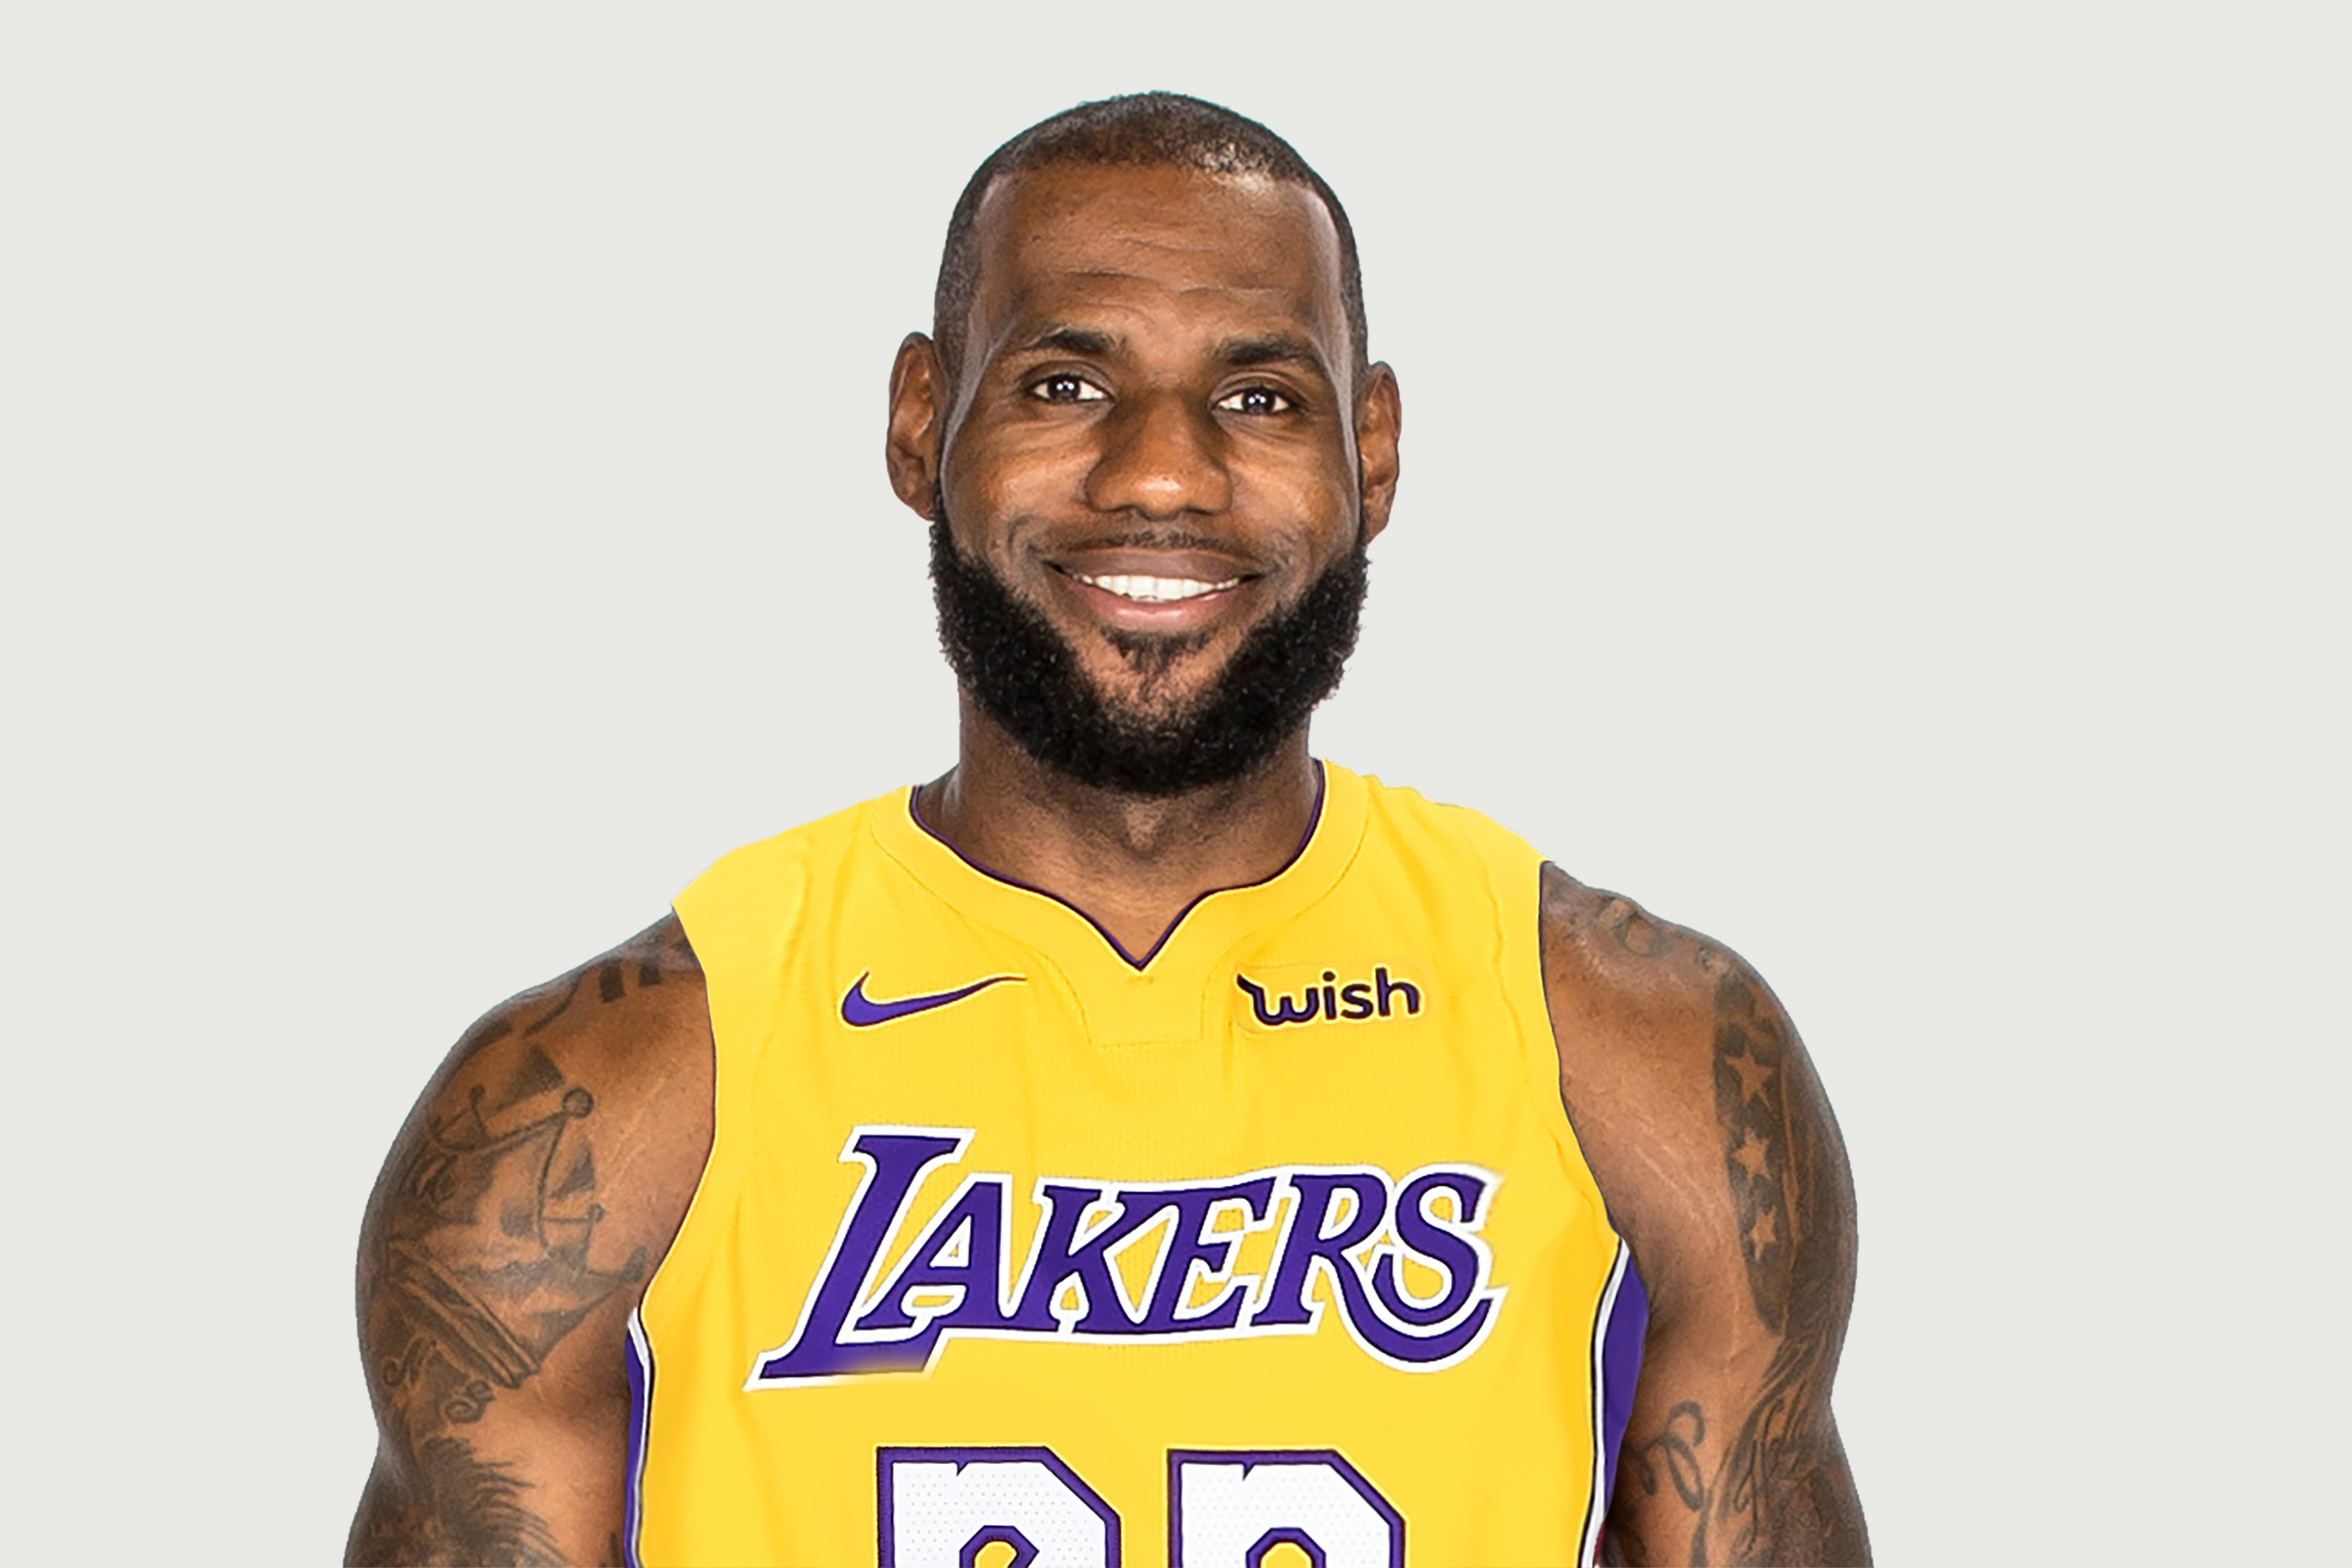 LeBron James Net Worth How Much Does He Make? Money